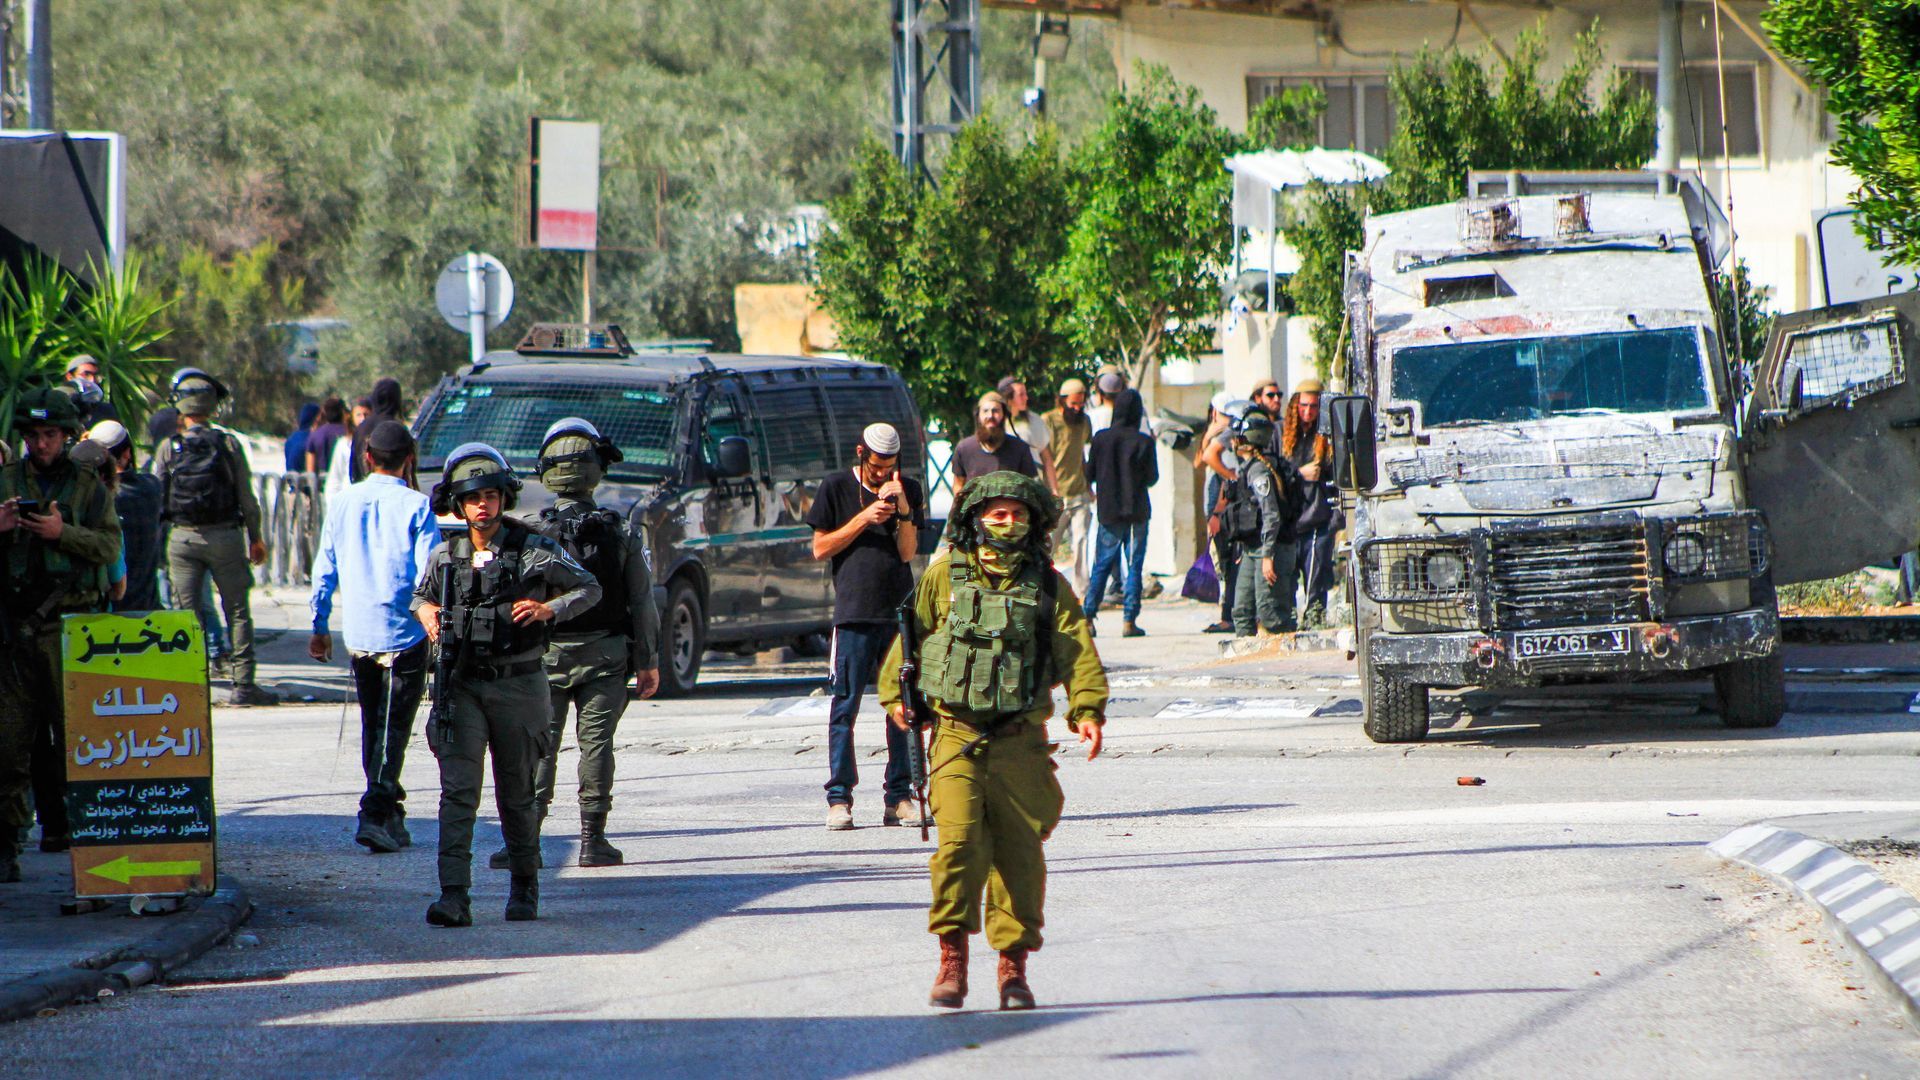 Israeli soldiers guard Jewish settlers after some launch an attack on the Palestinian town of Deir Sharaf following a shooting attack that killed an Israeli man in the area. Photo: Nasser Ishtayeh/SOPA Images/LightRocket via Getty Images